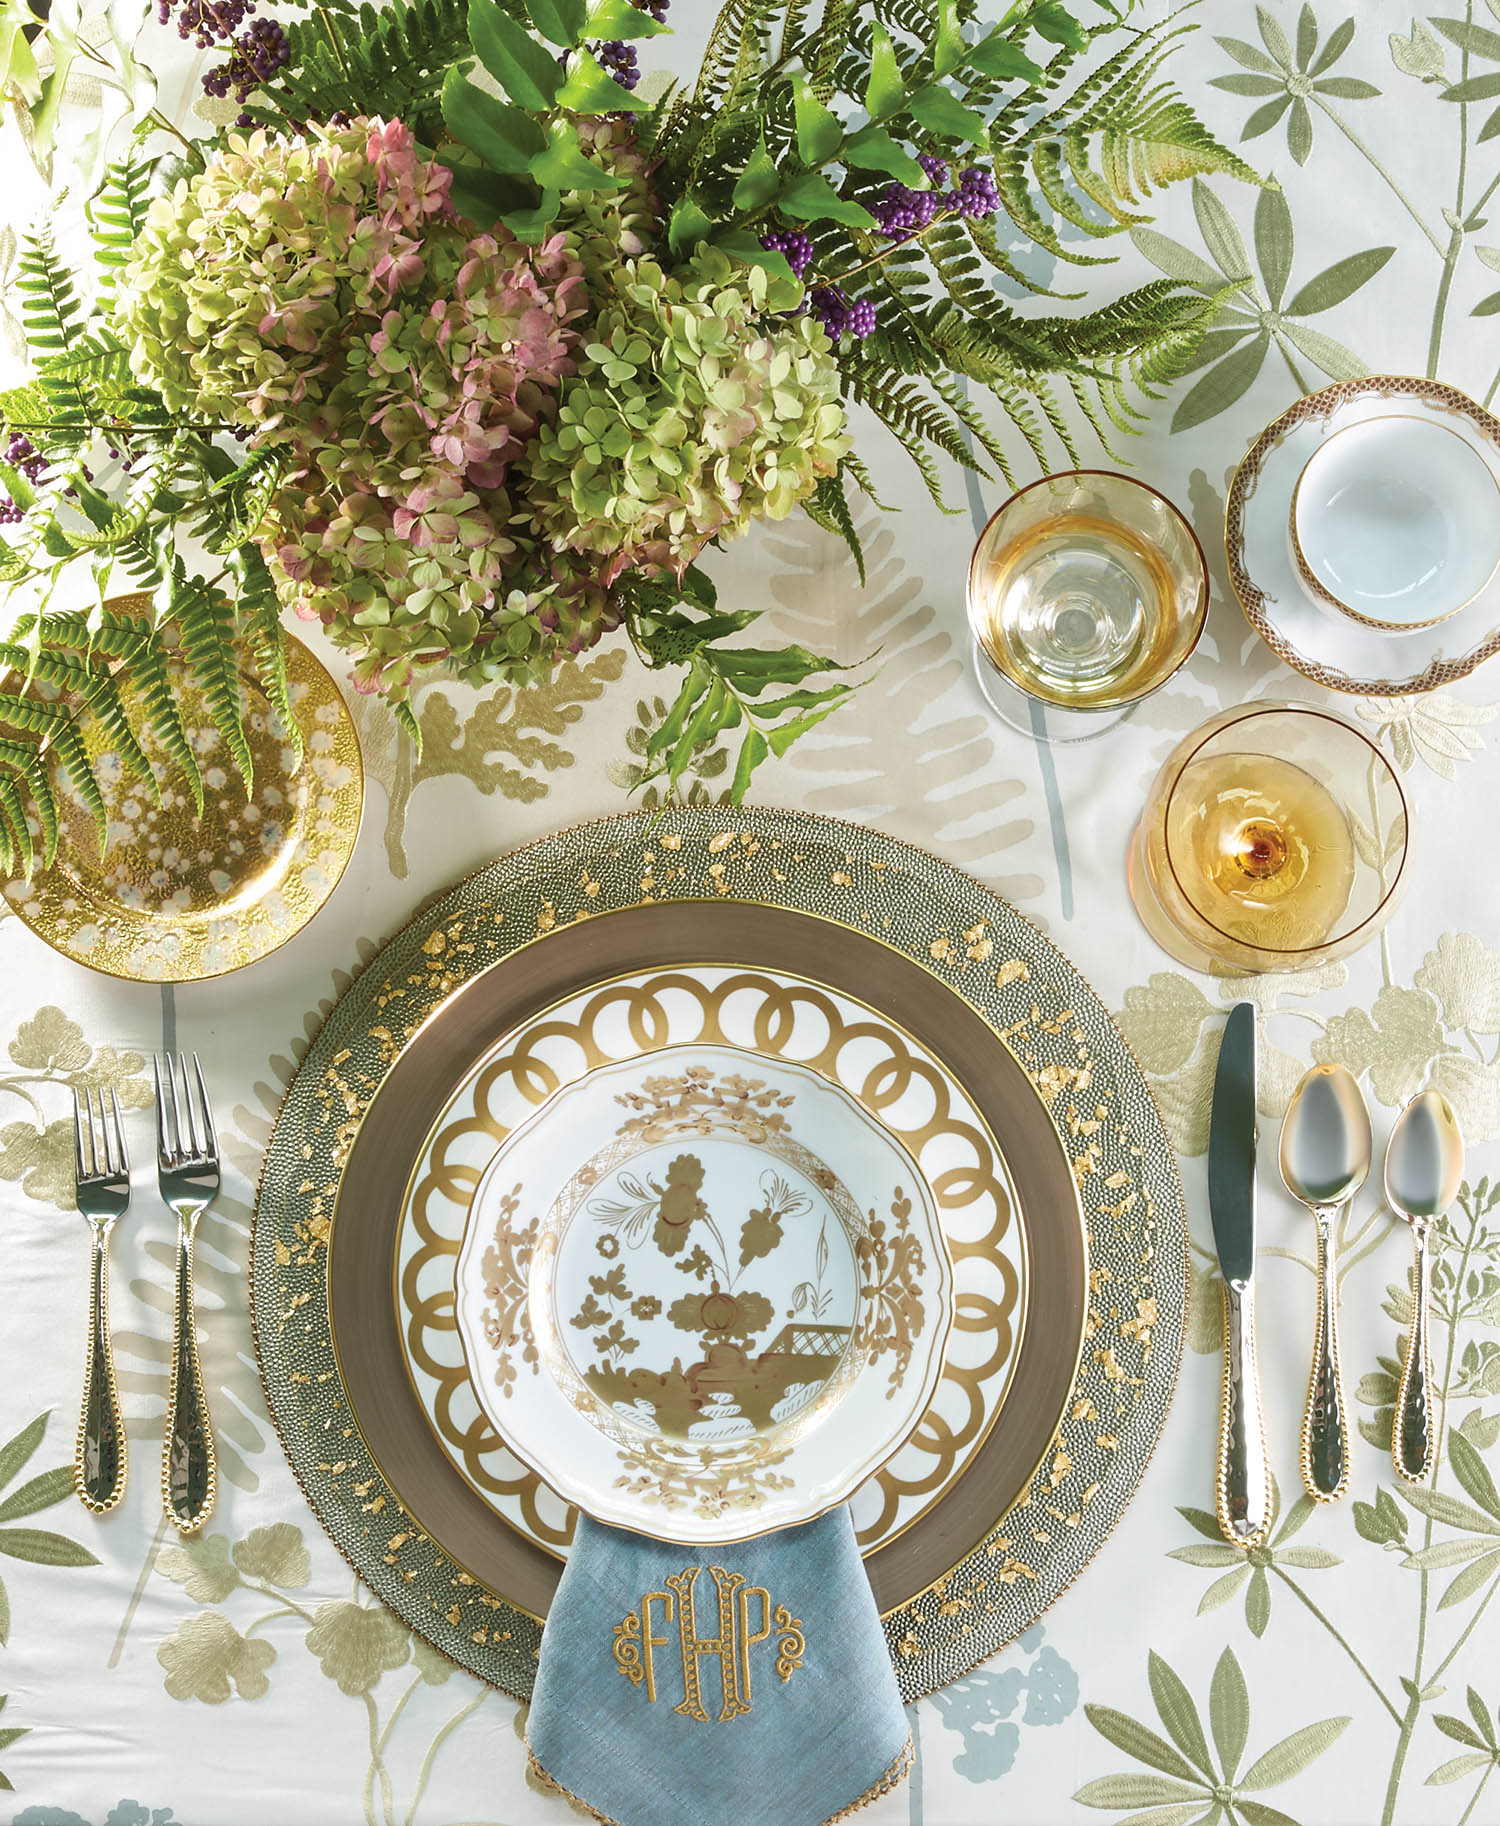 Table setting in tones of gold and green with arrangement of hydrangeas and fern fronds.